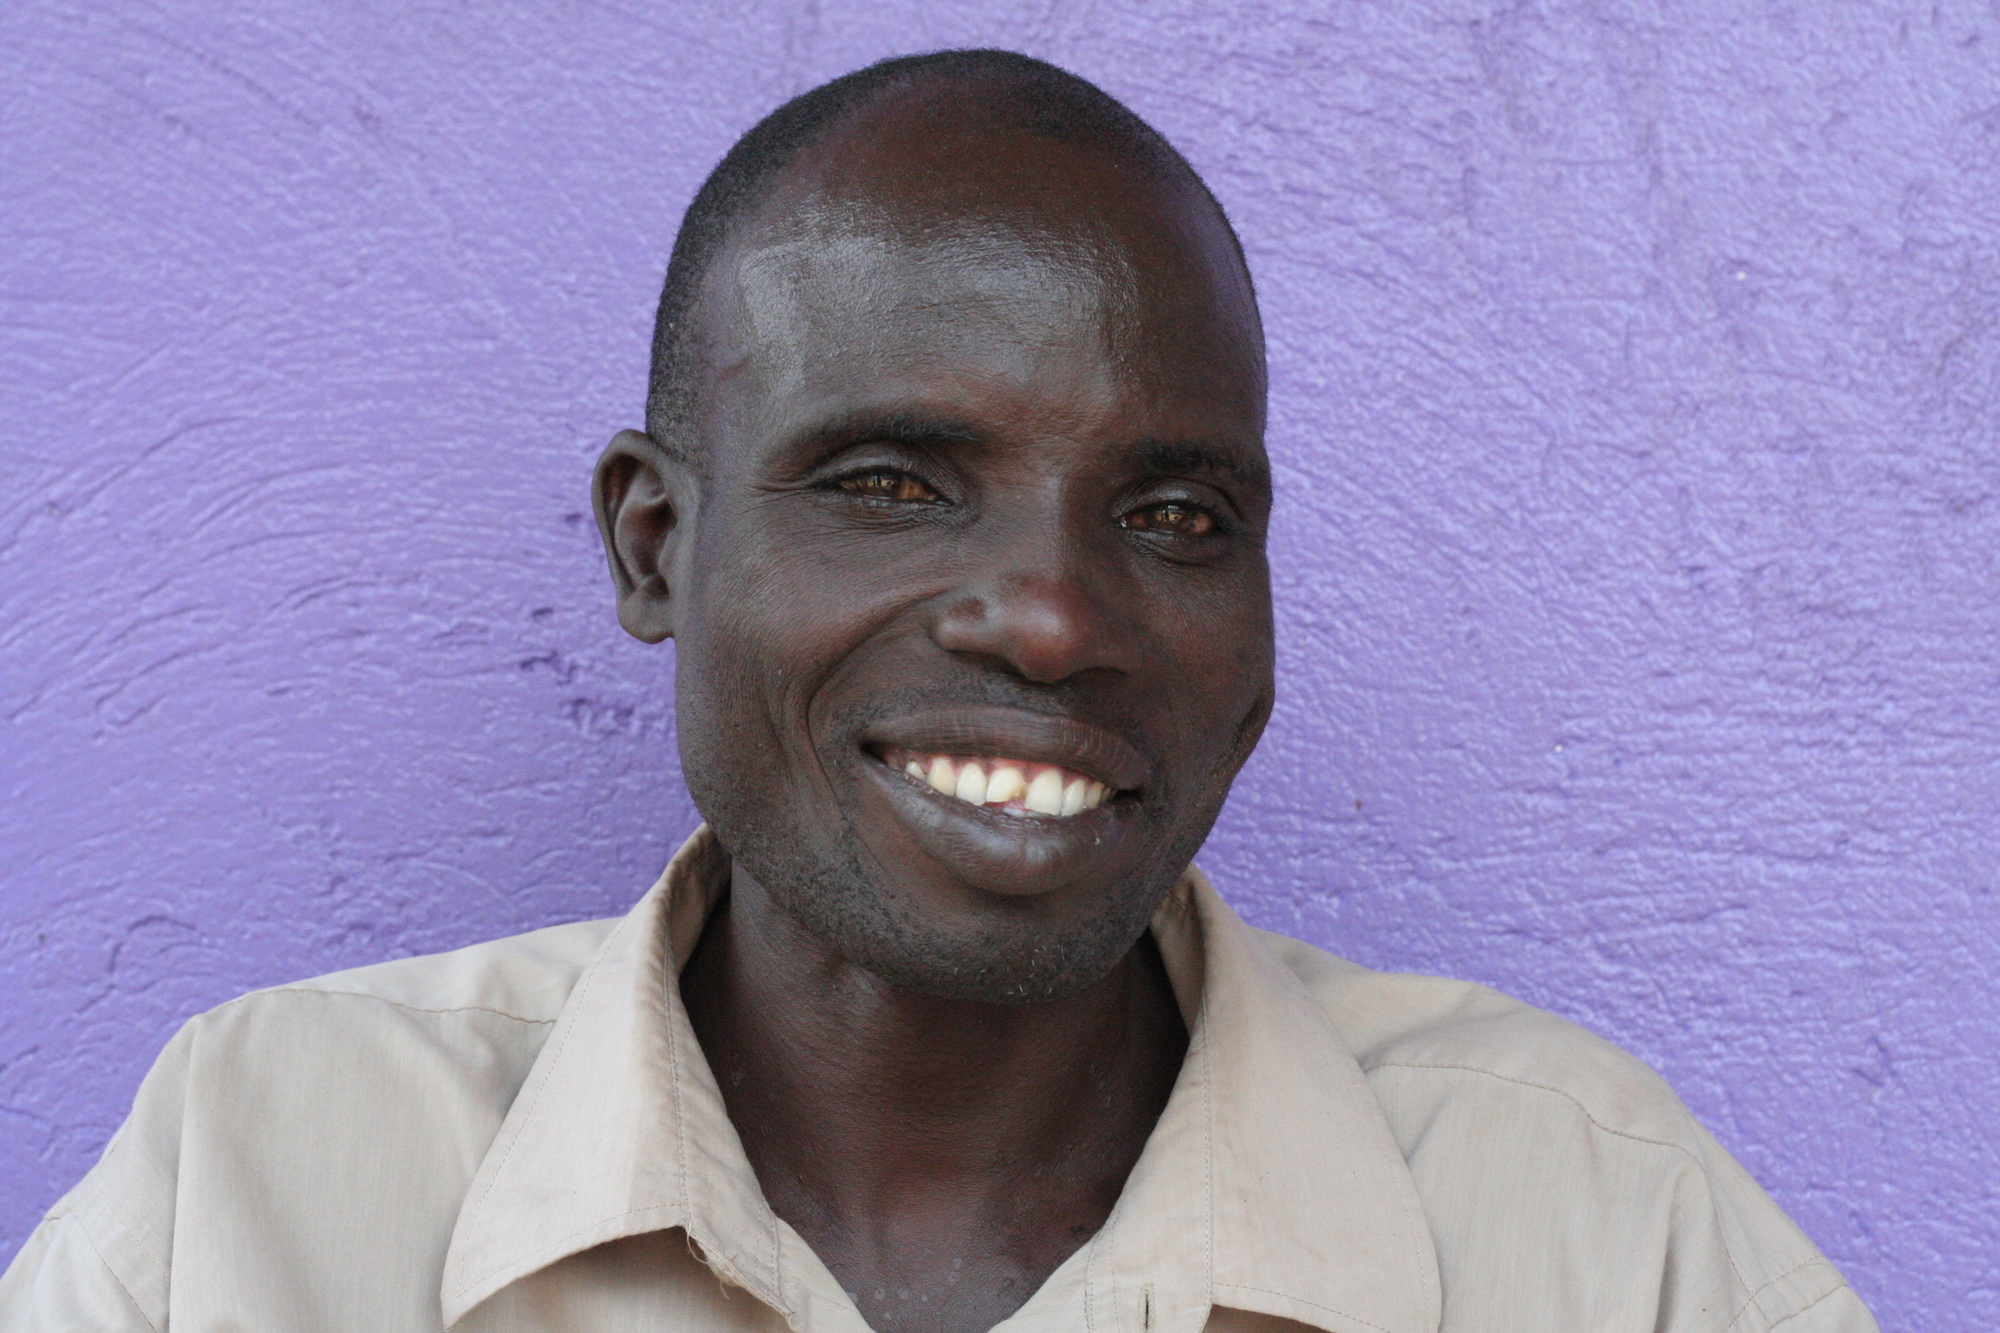 Man smiling in front of a purple wall